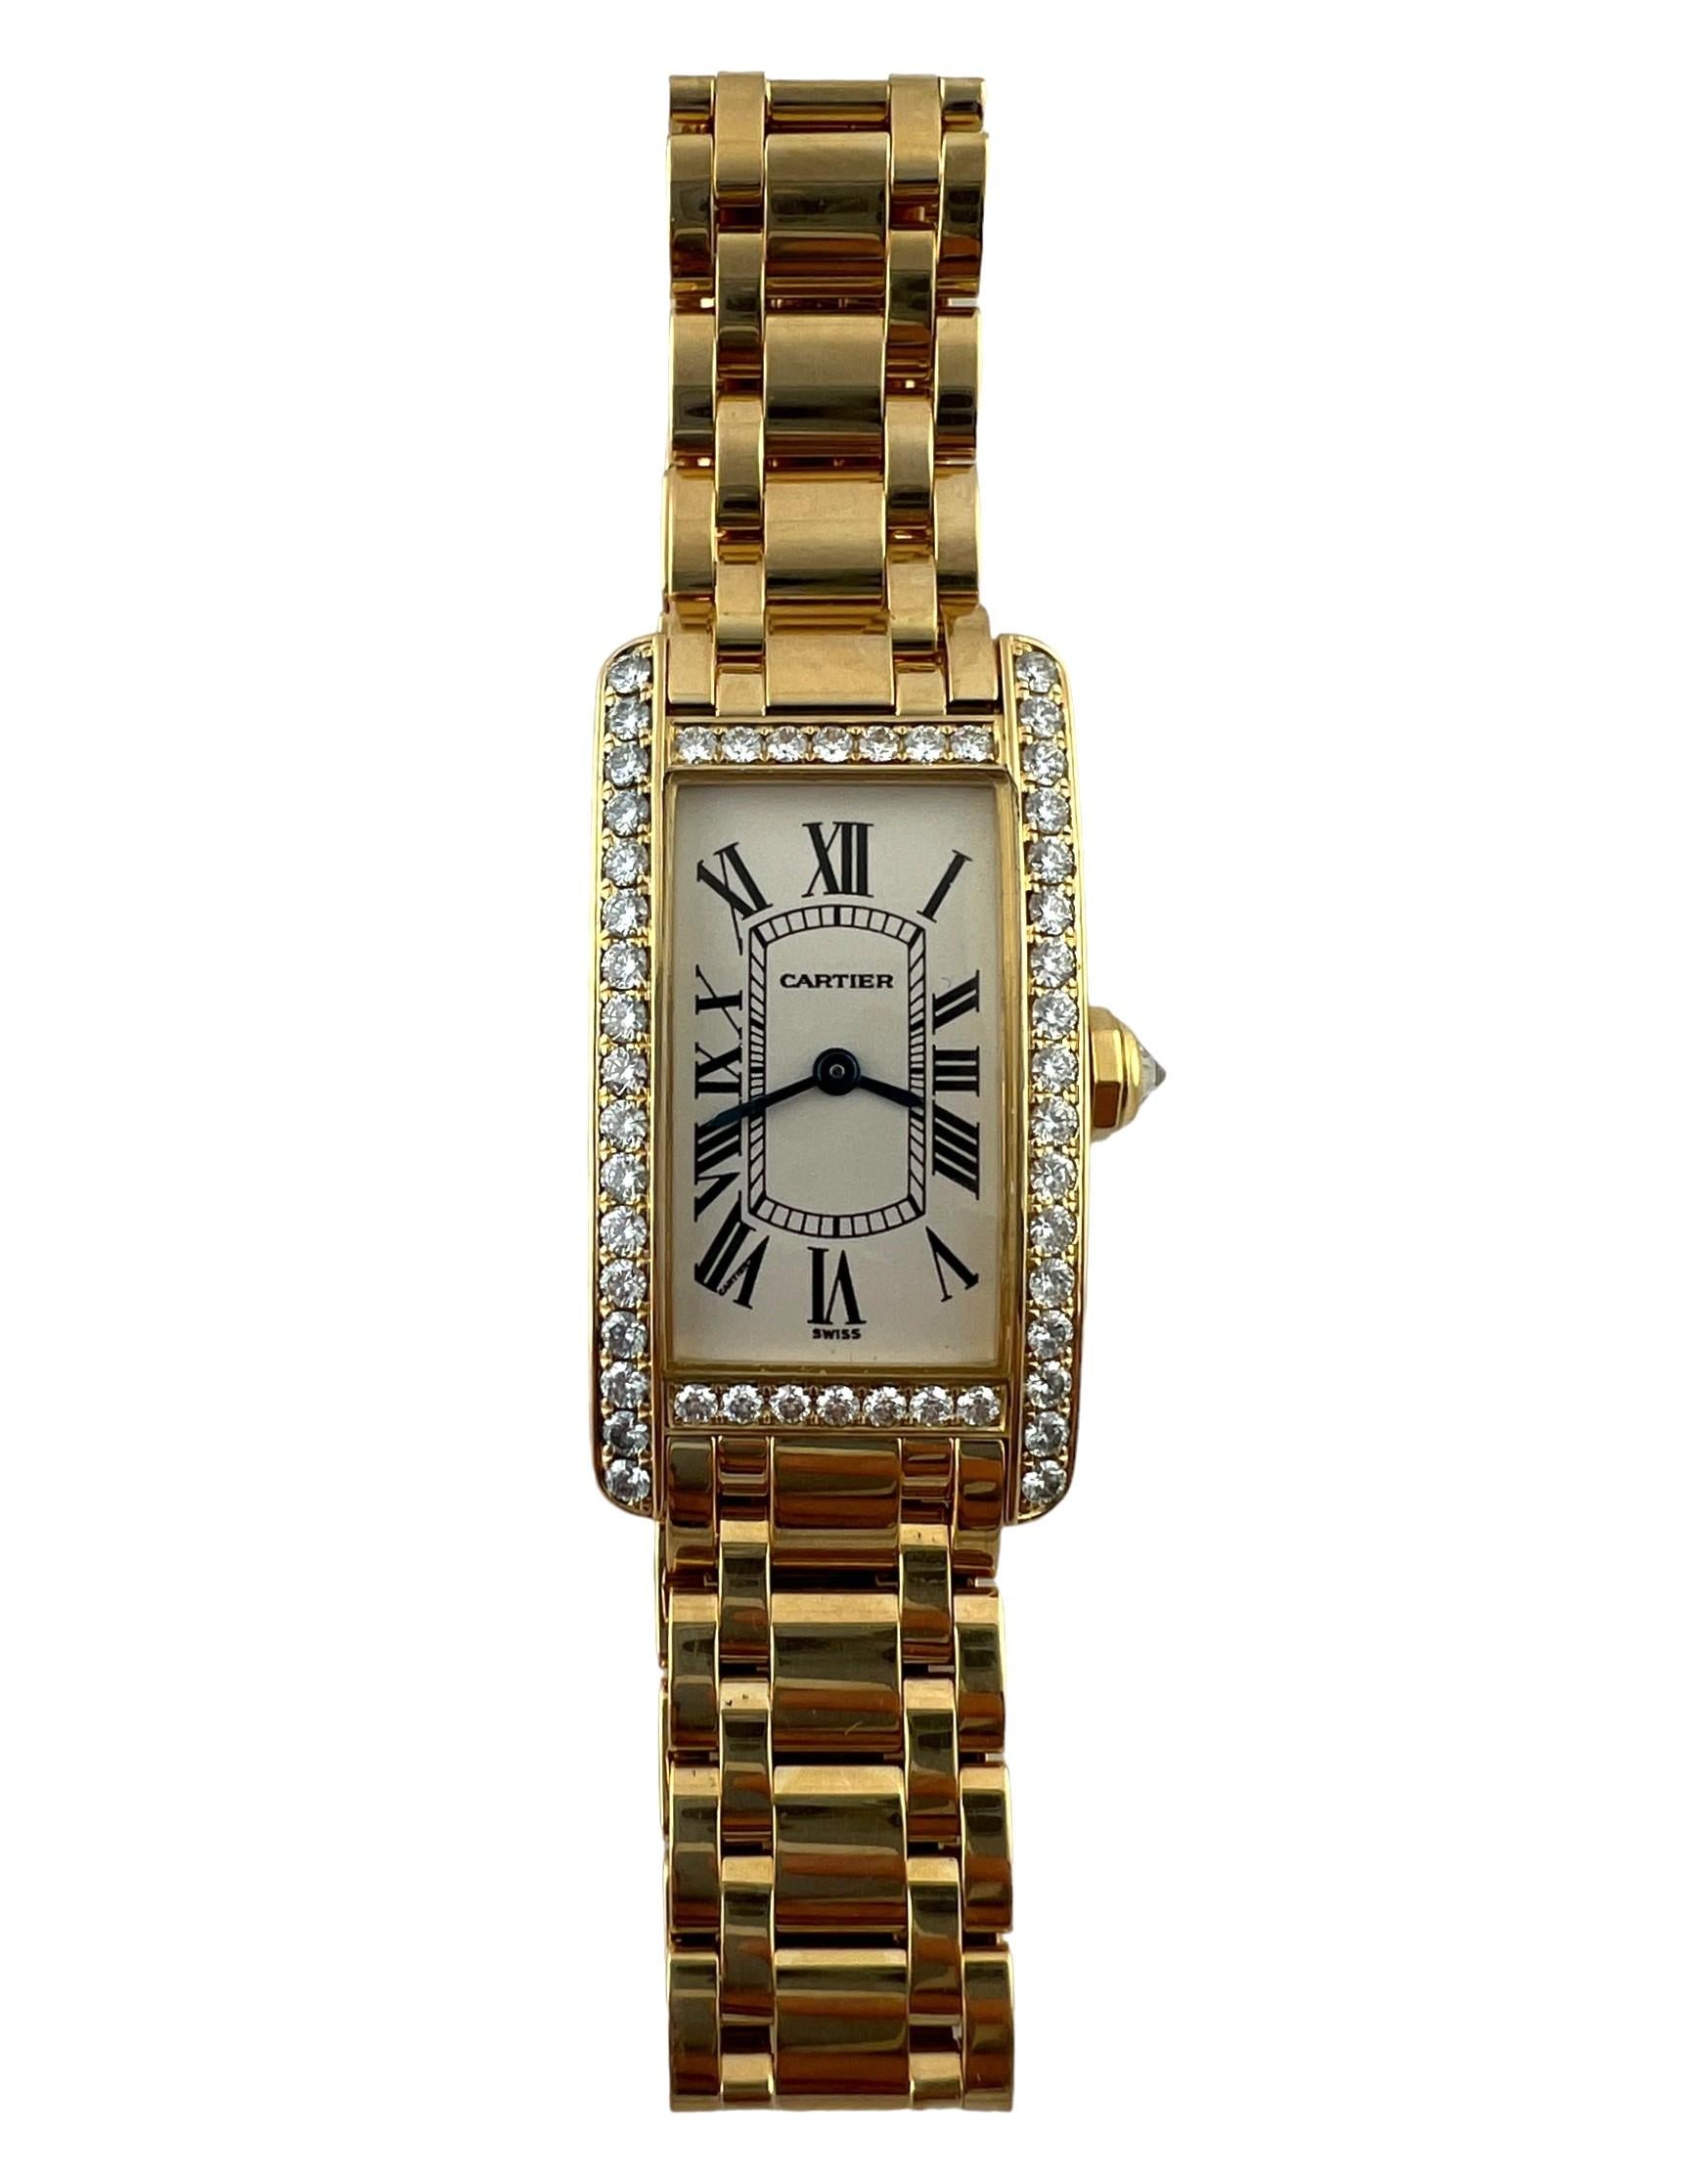 Cartier 18K Yellow Gold Diamond Tank Americaine Watch

Model: 1710
Serial: SM12546

This elegant Cartier watch is set in 18K yellow gold with a diamond bezel and crown.

Case of the watch is 34.8mm x 19mm x 6.32mm

a row of diamonds surrounds each